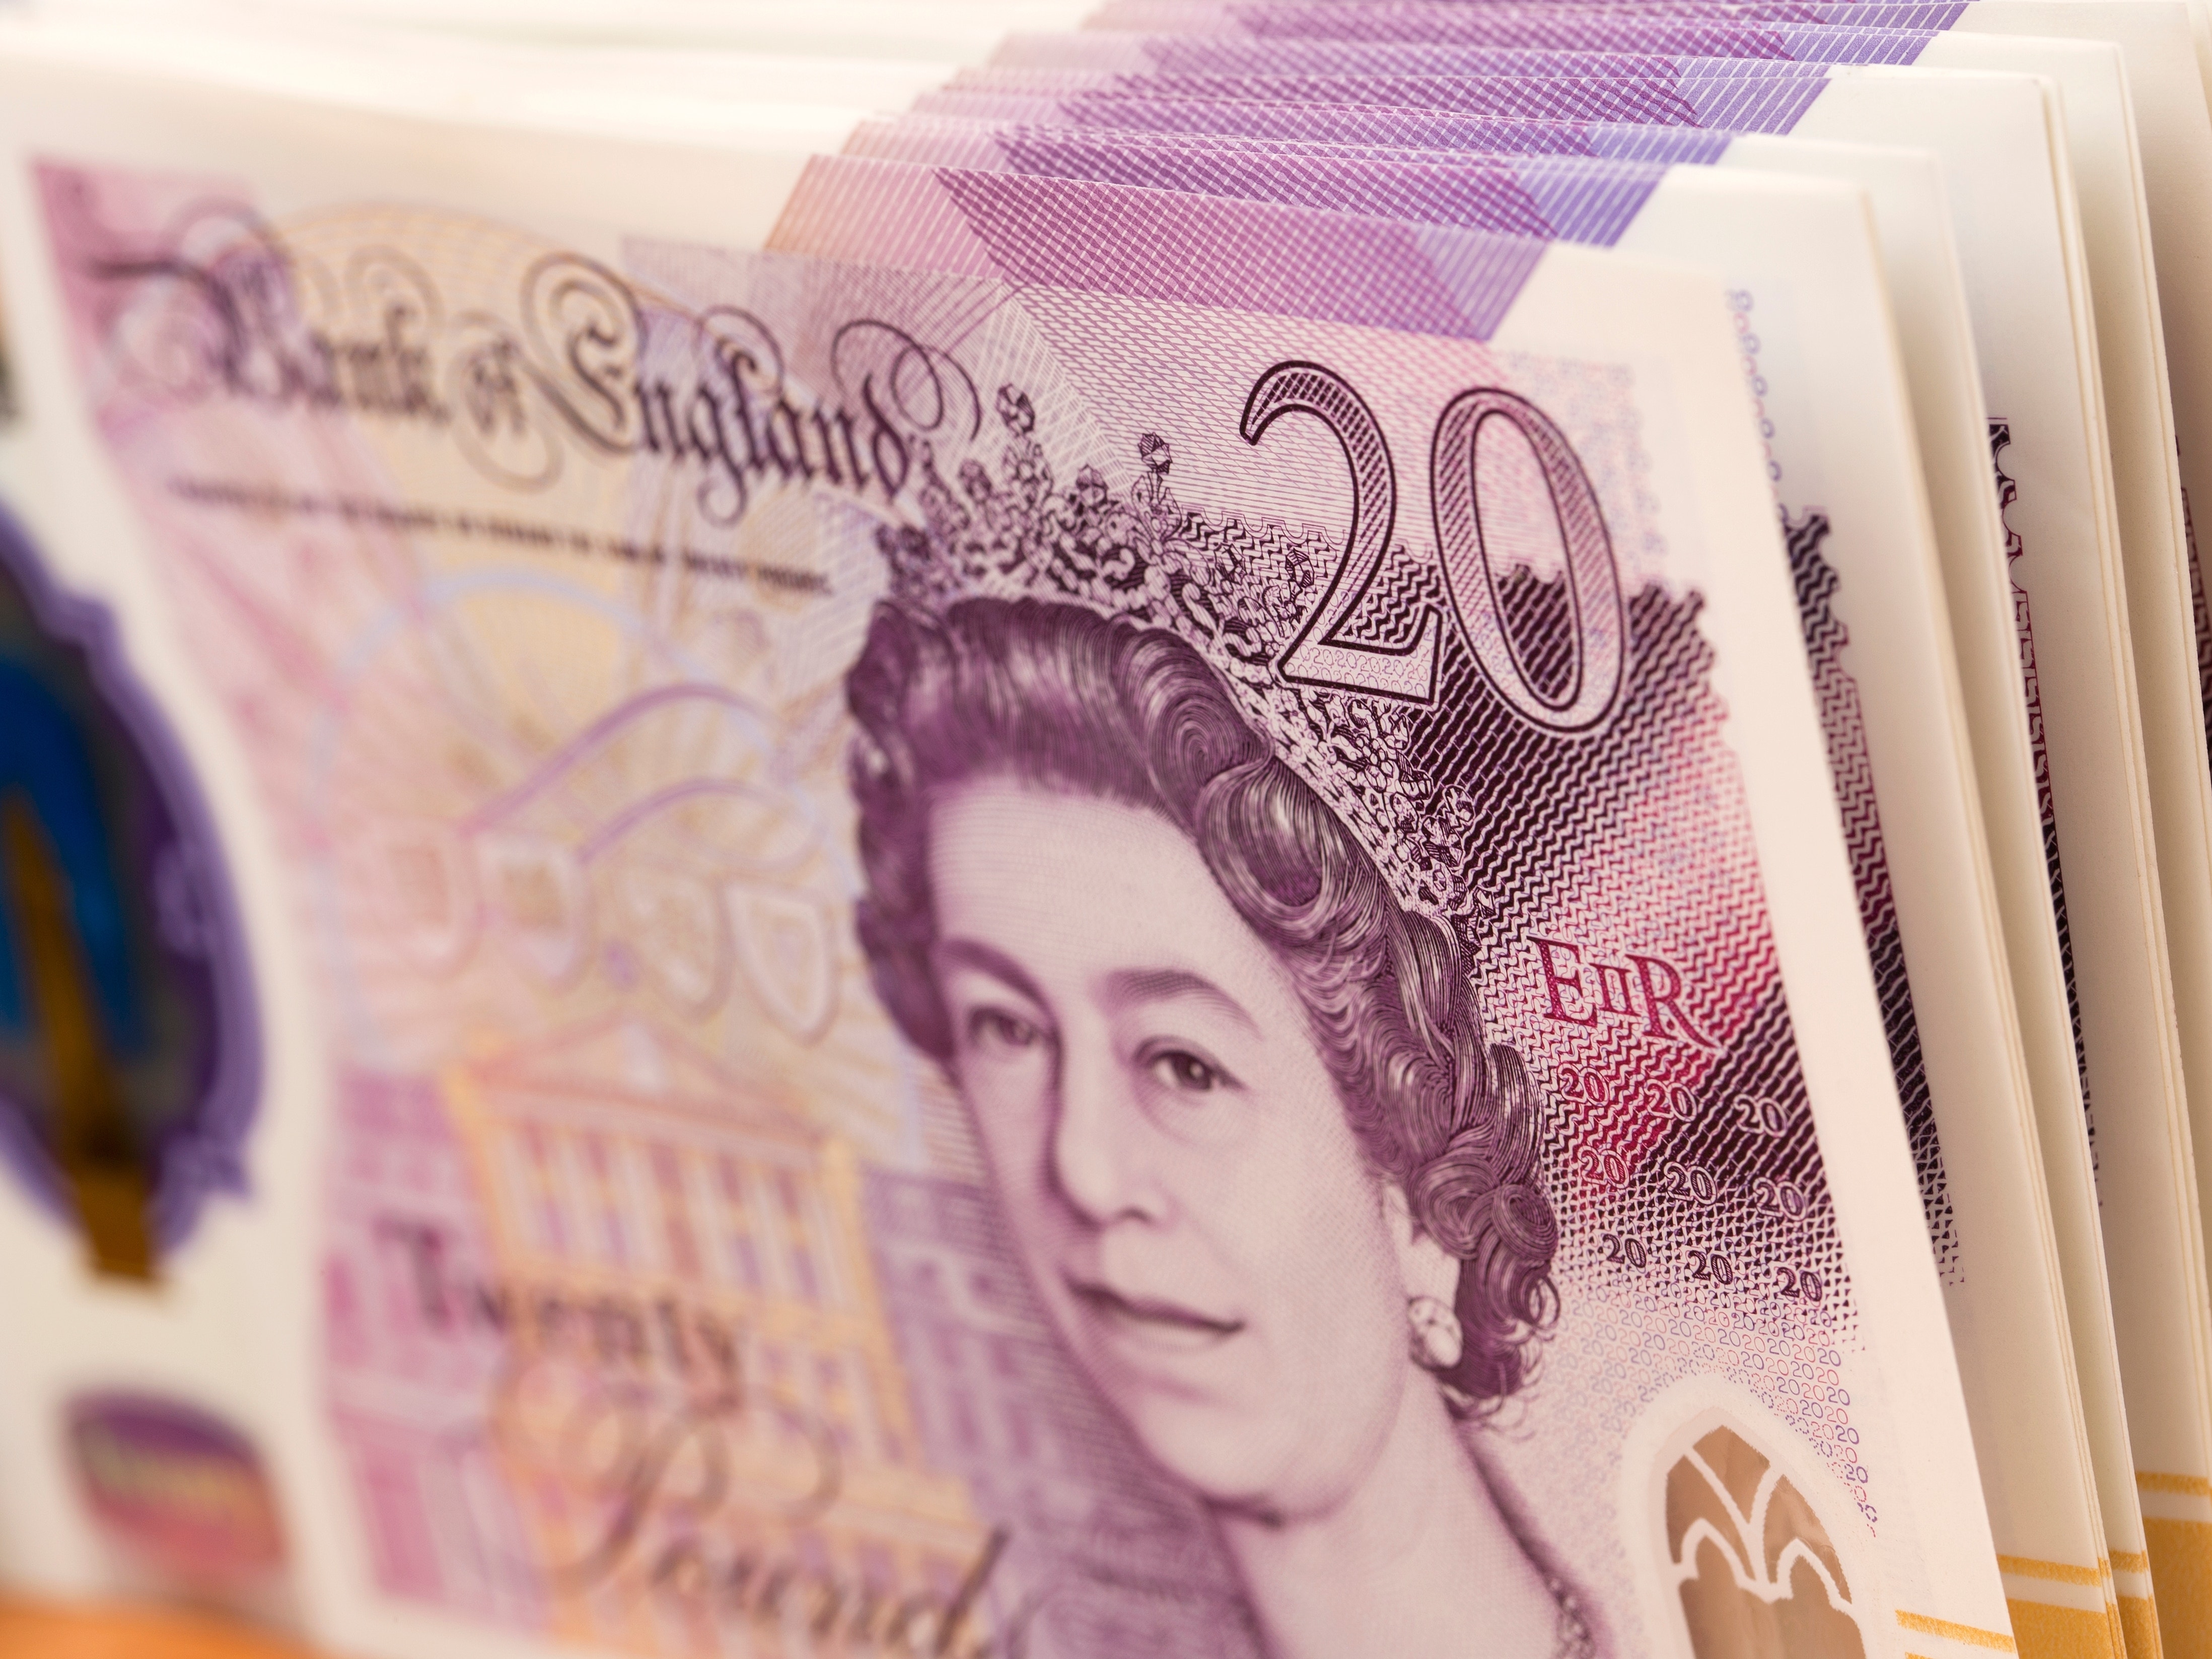 UK Bank Notes With Queen Elizabeth's Image: Will They Remain Legal Tender?